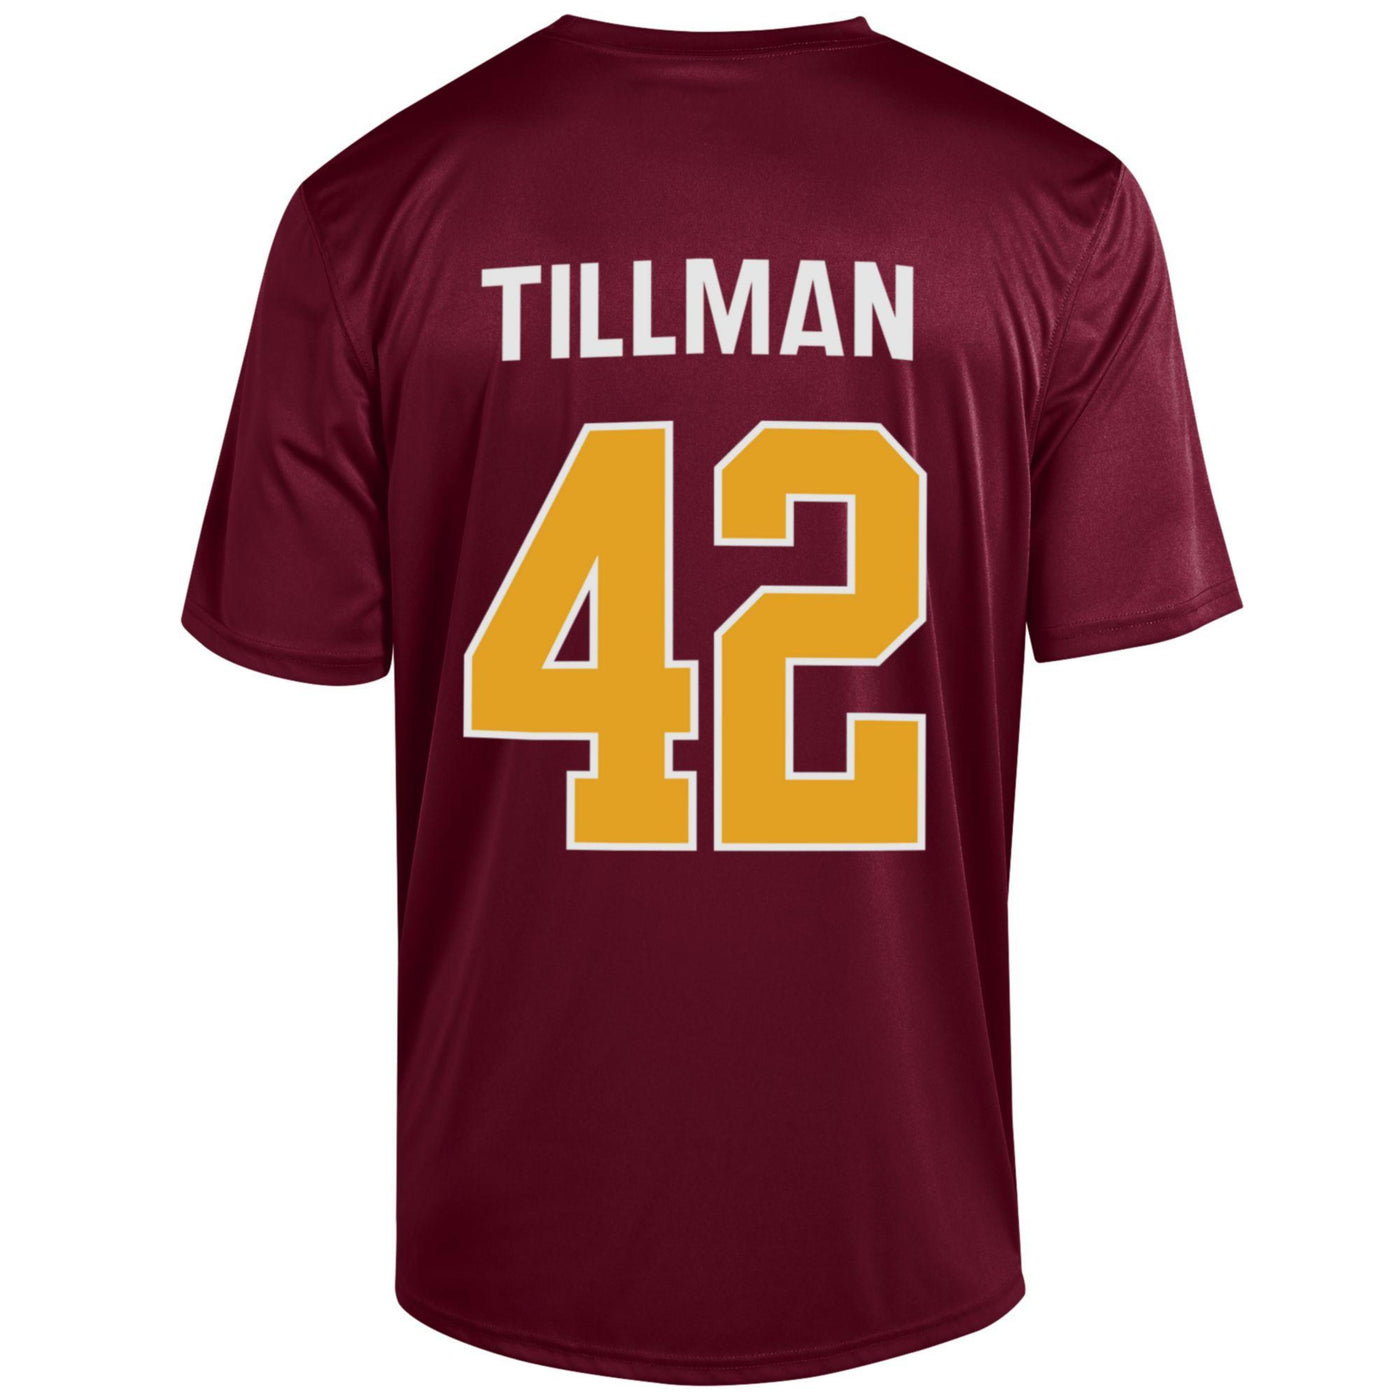 Back side of ASU maroon shirt with the text 